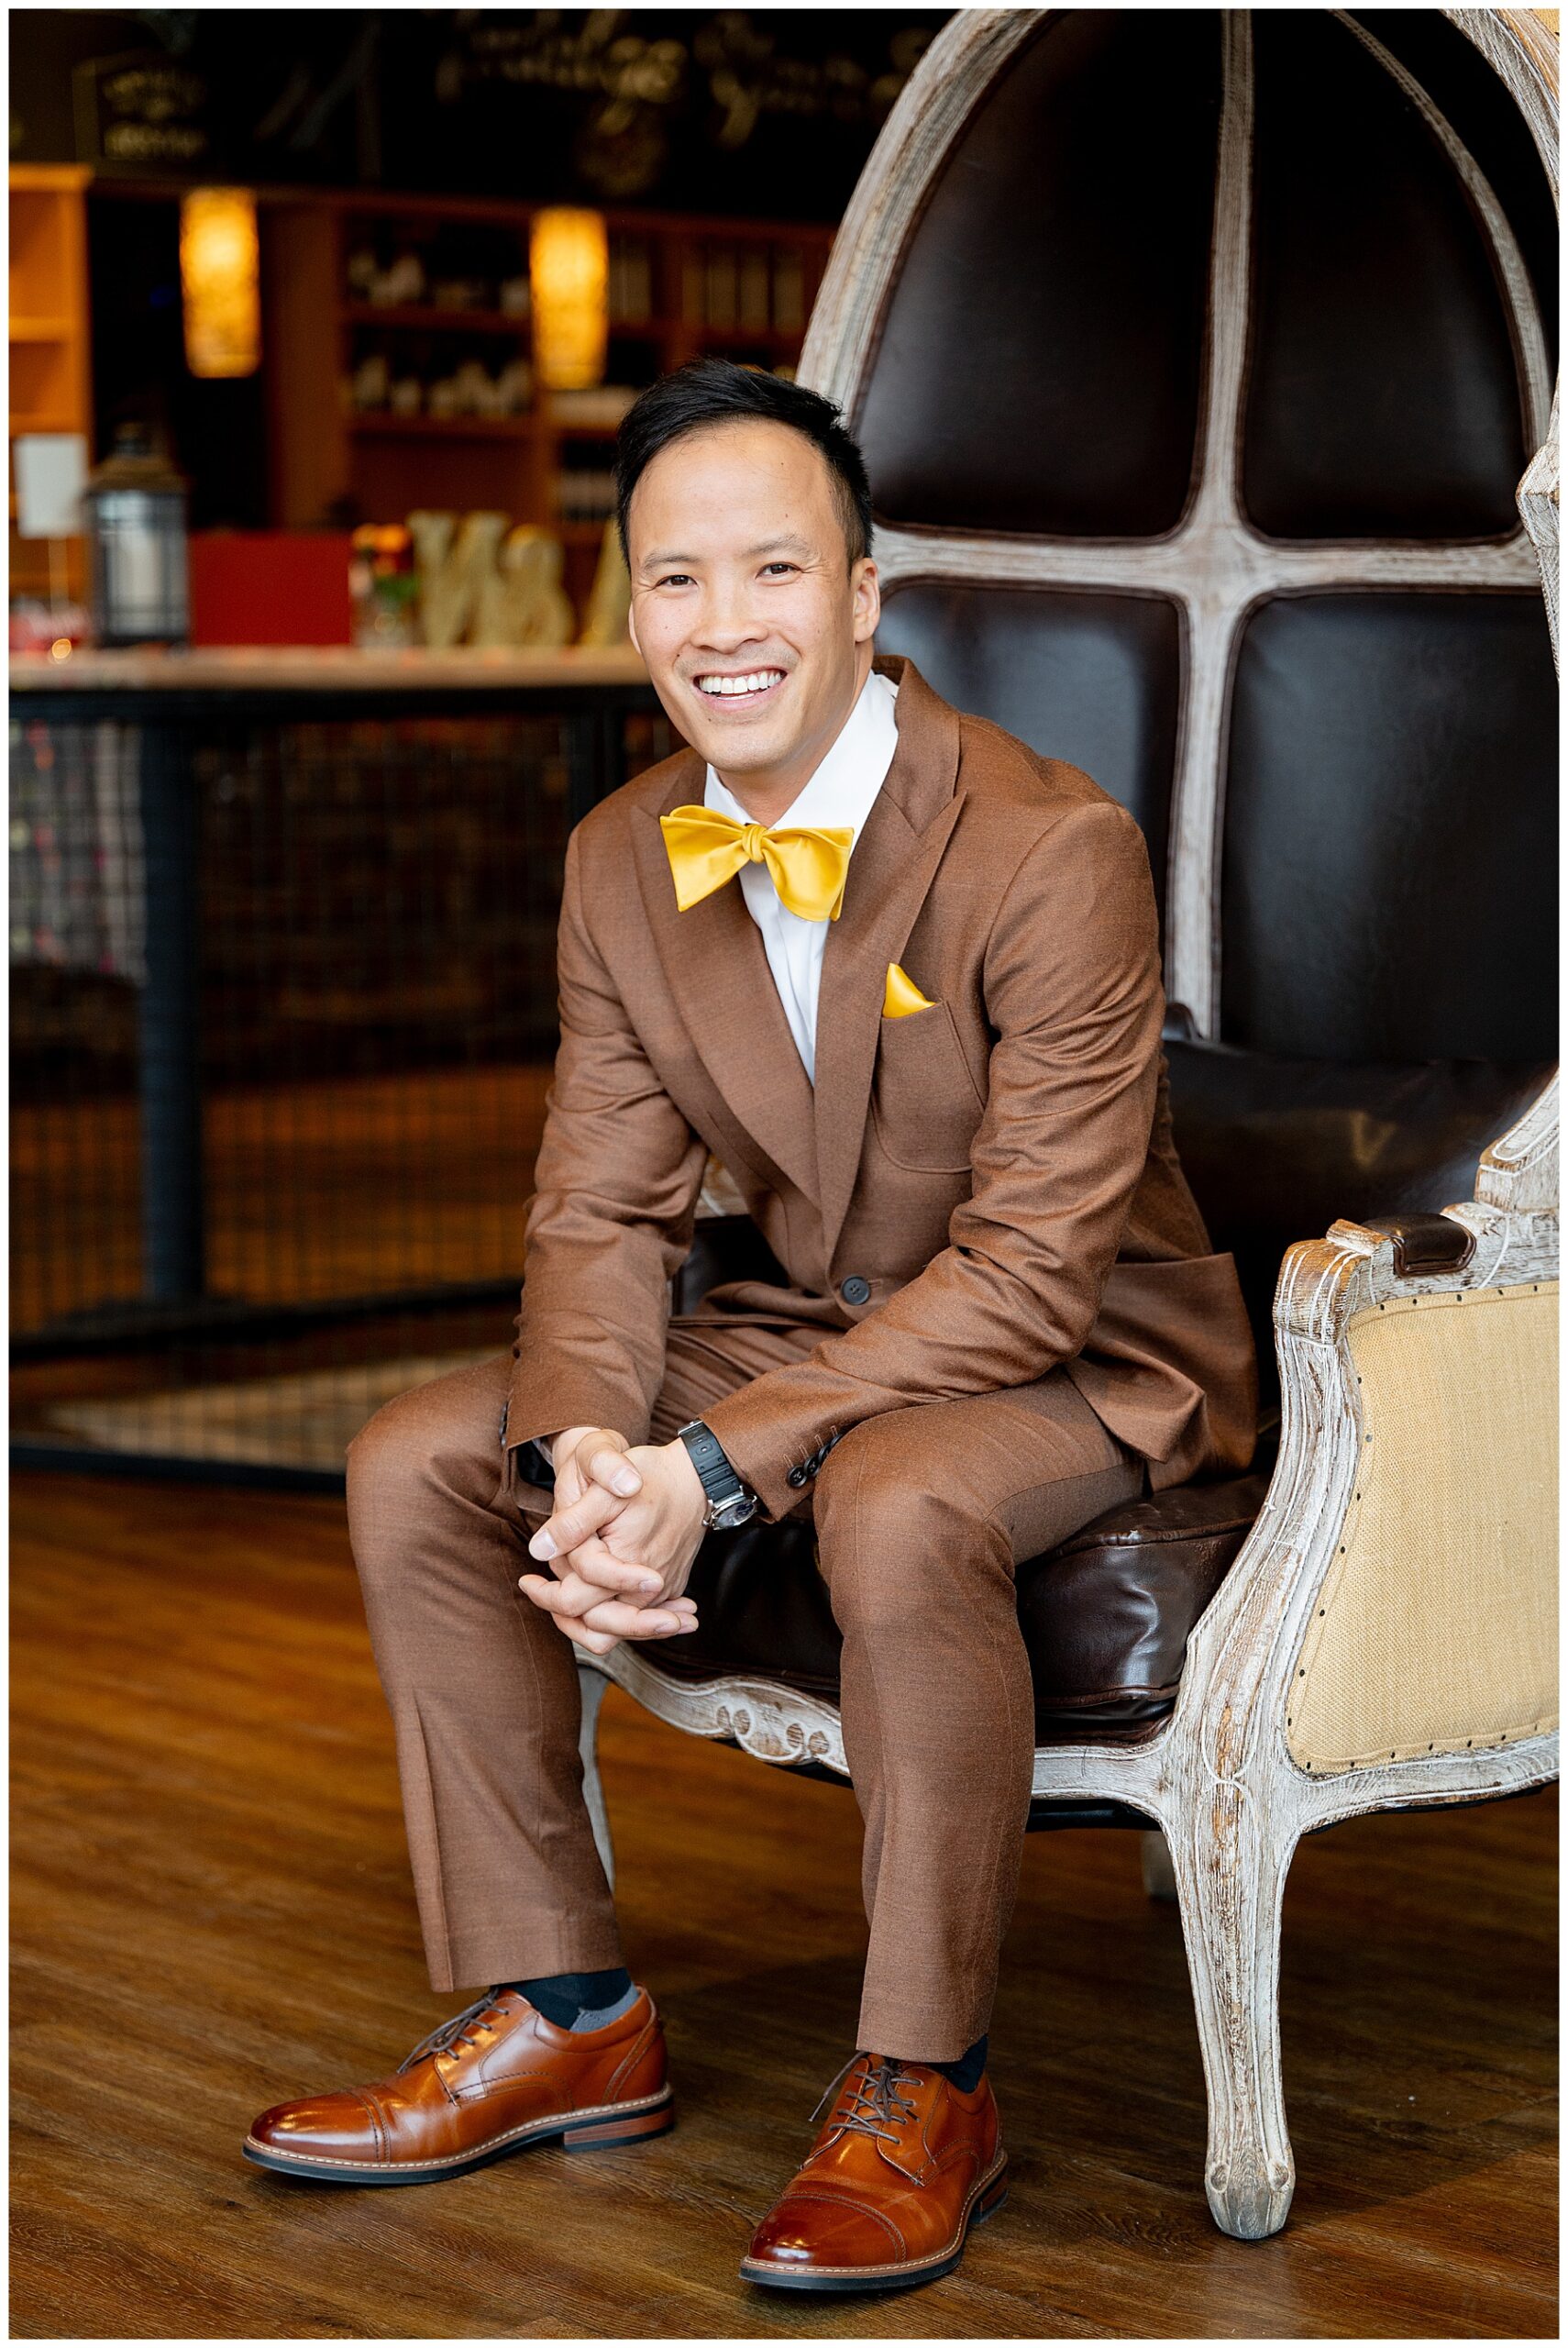 groom sits in chair wearing brown suit and yellow bowtie smiling at the camera